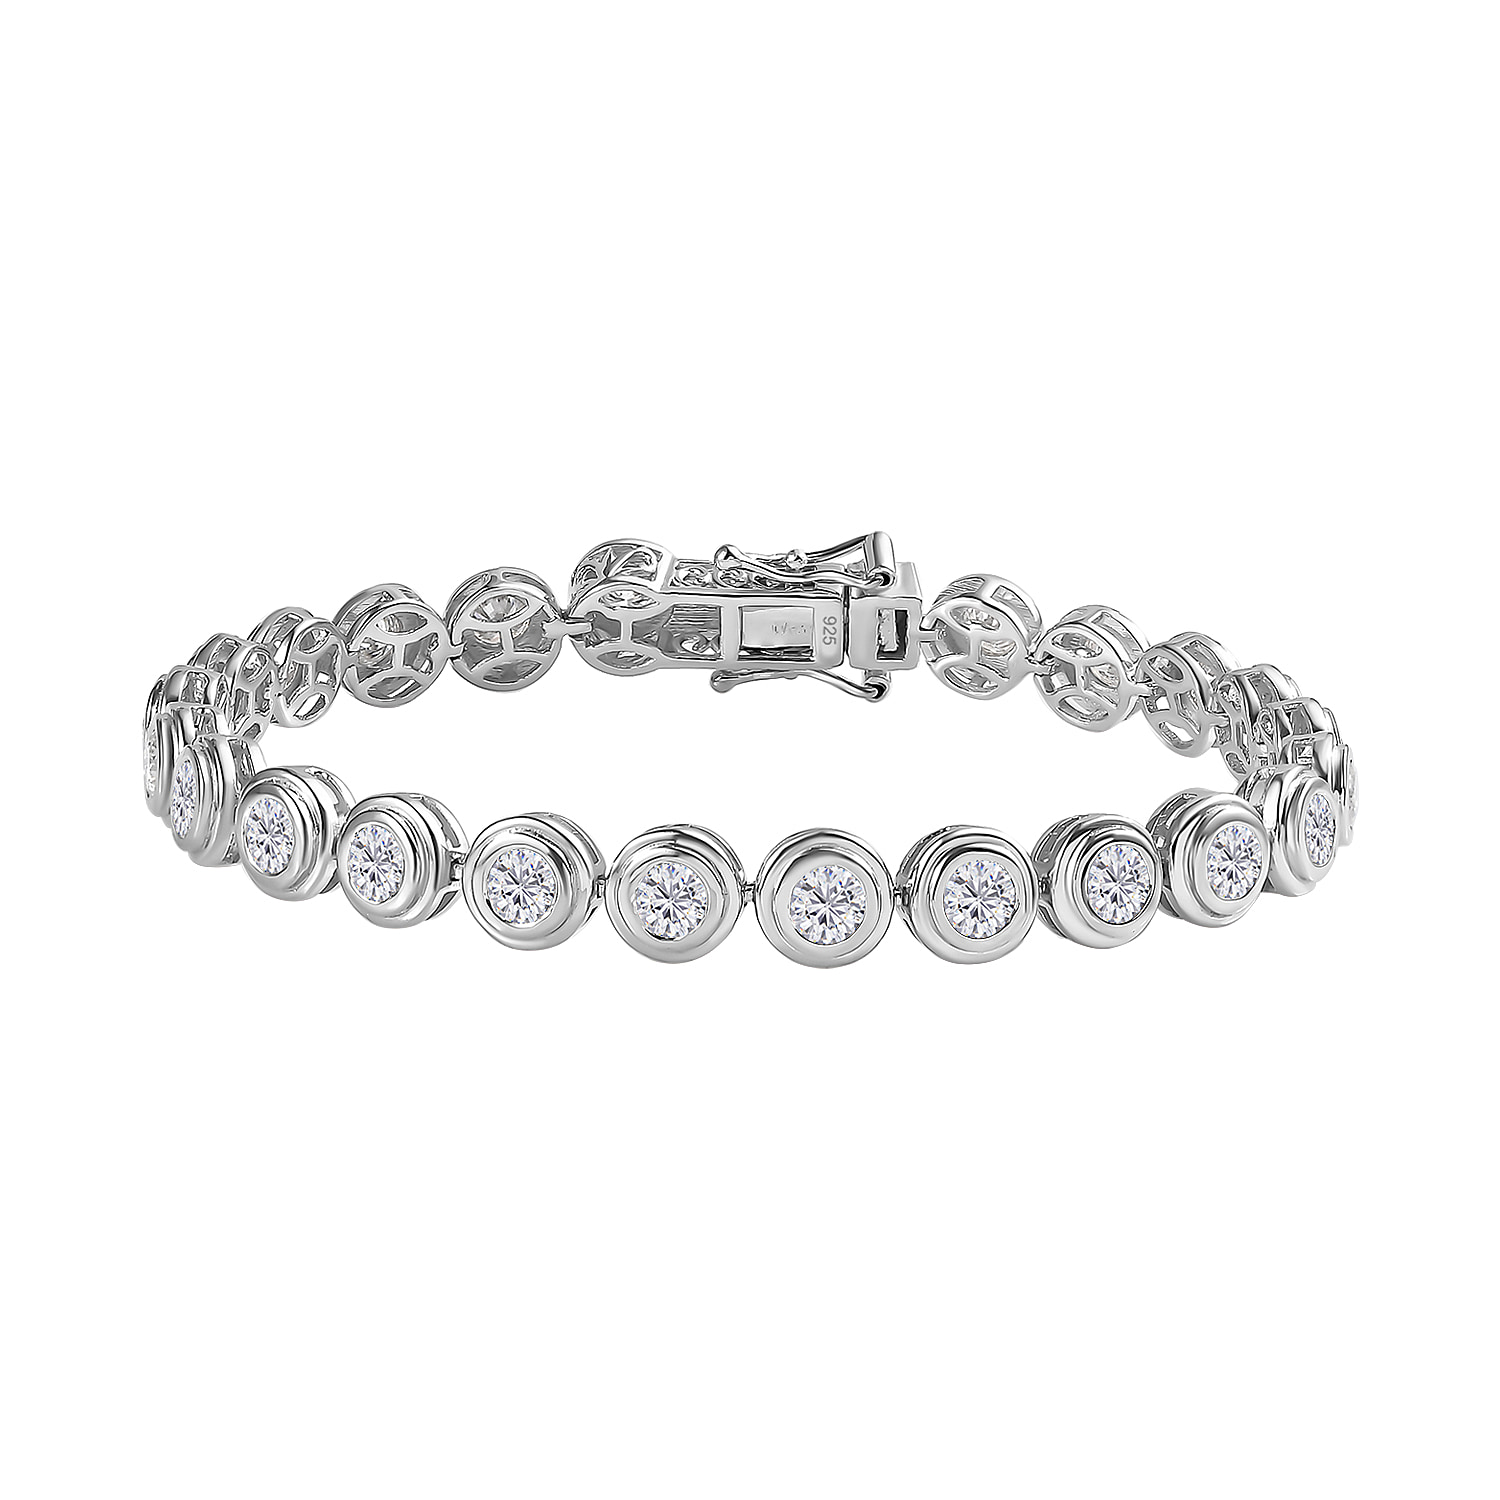 One To Own - Moissanite Bracelet (Size - 7) in Platinum Overlay Sterling Silver 4.40 Ct, Silver Wt 14.75 GM